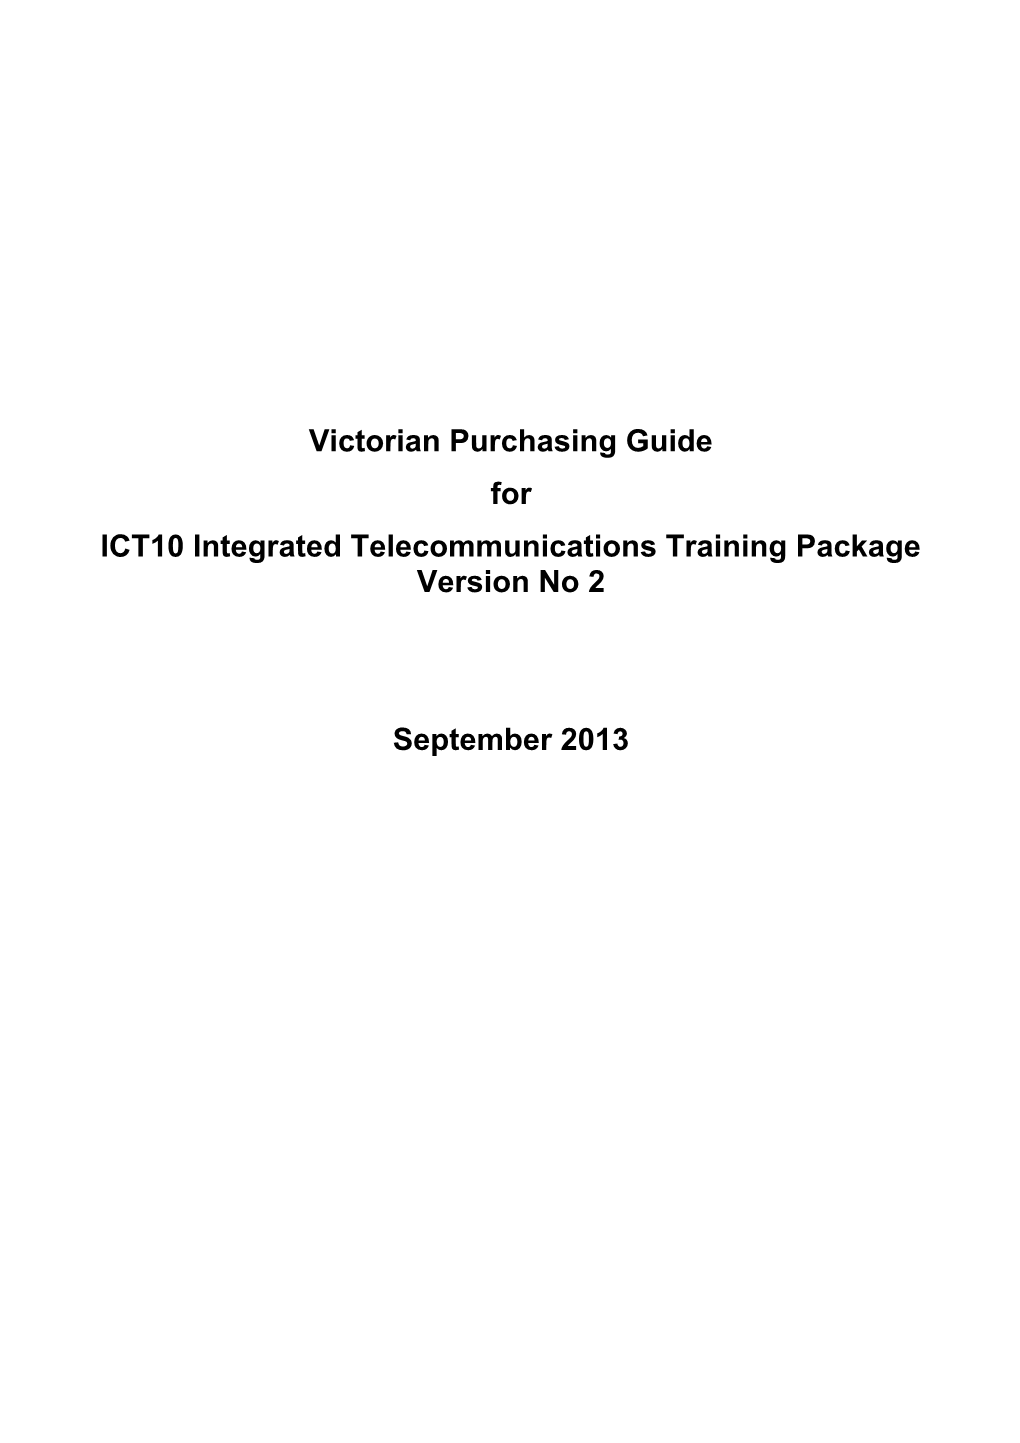 Victorian Purchasing Guide for ICT10 Integrated Telecommunications Version 2